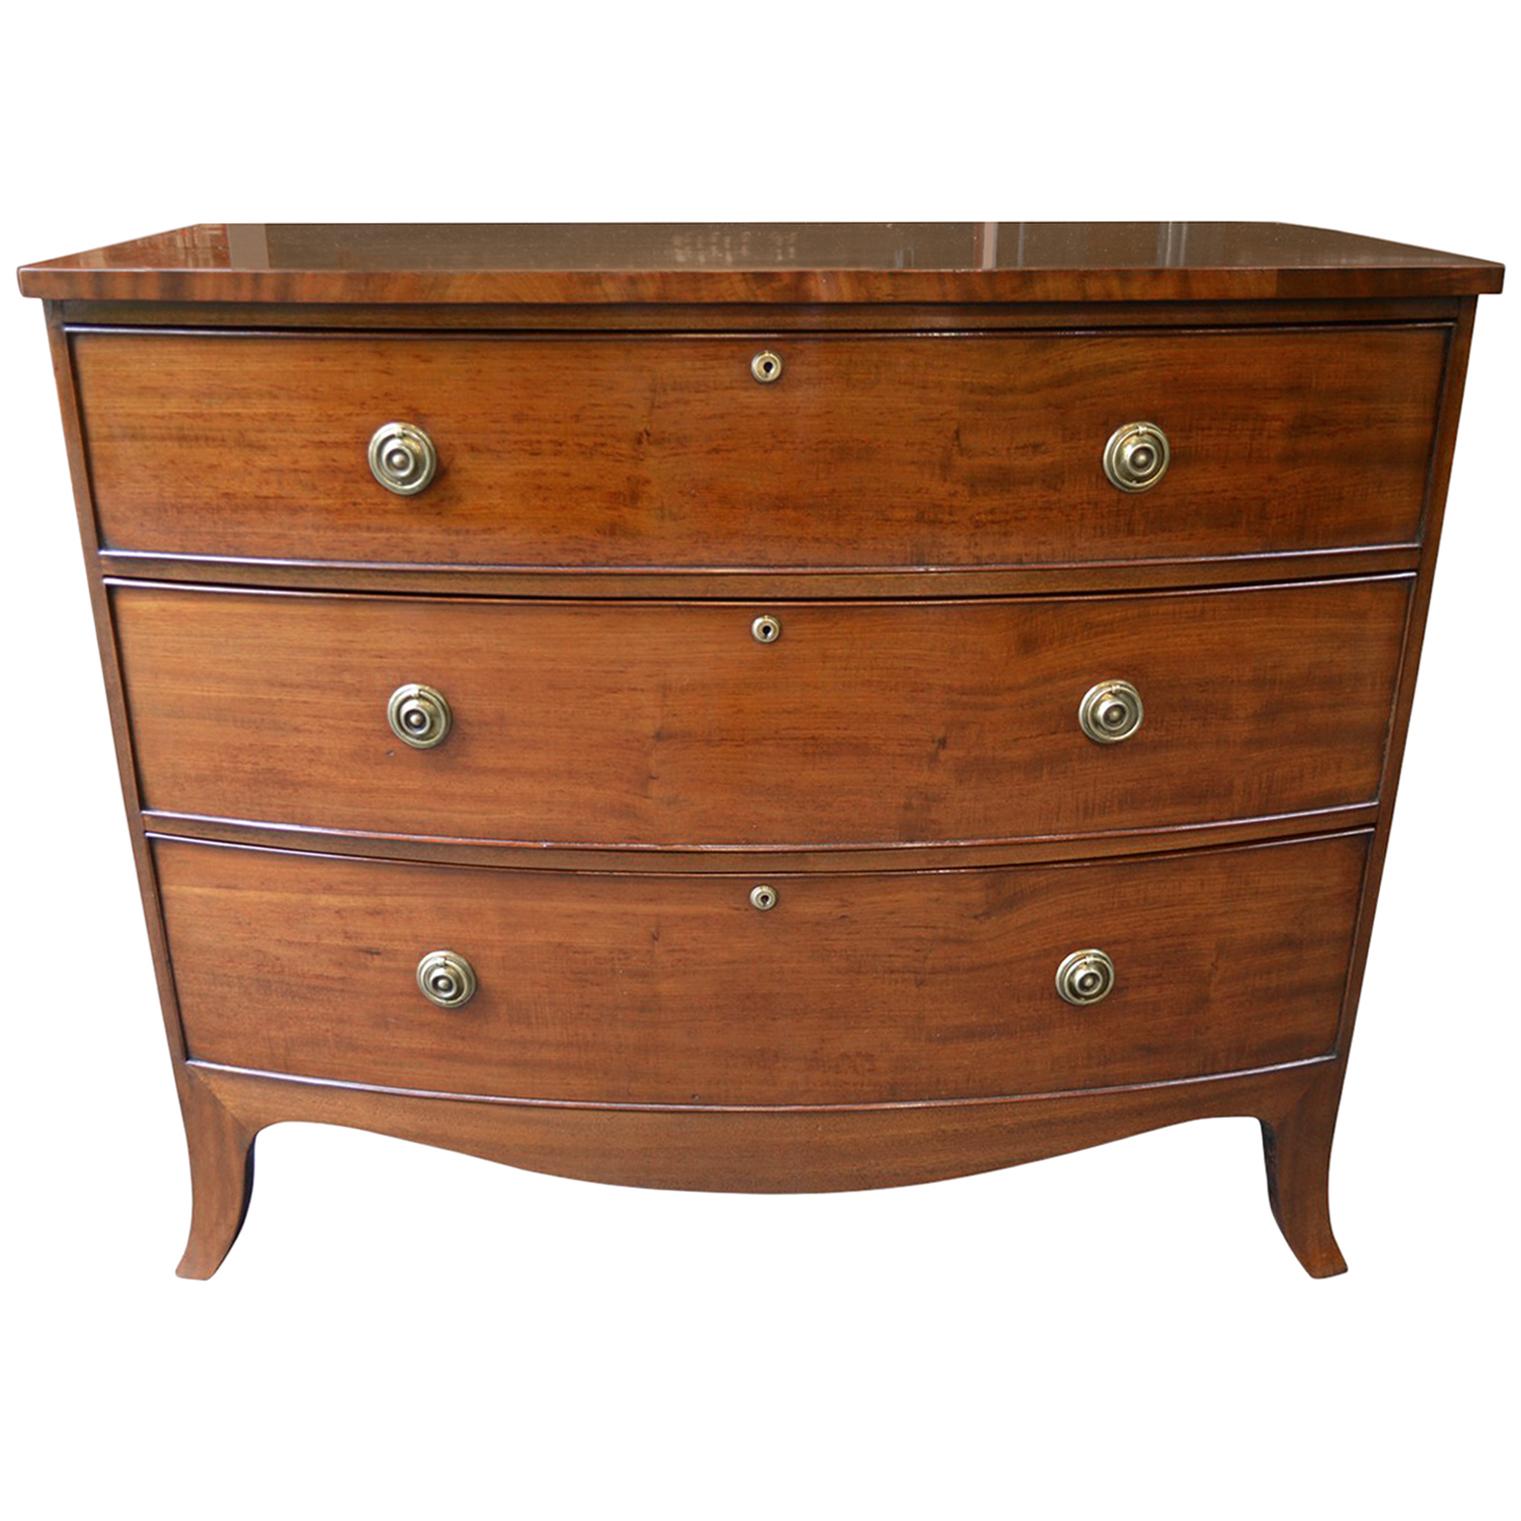 English 19th Century Mahogany Bow Fronted Chest of Drawers